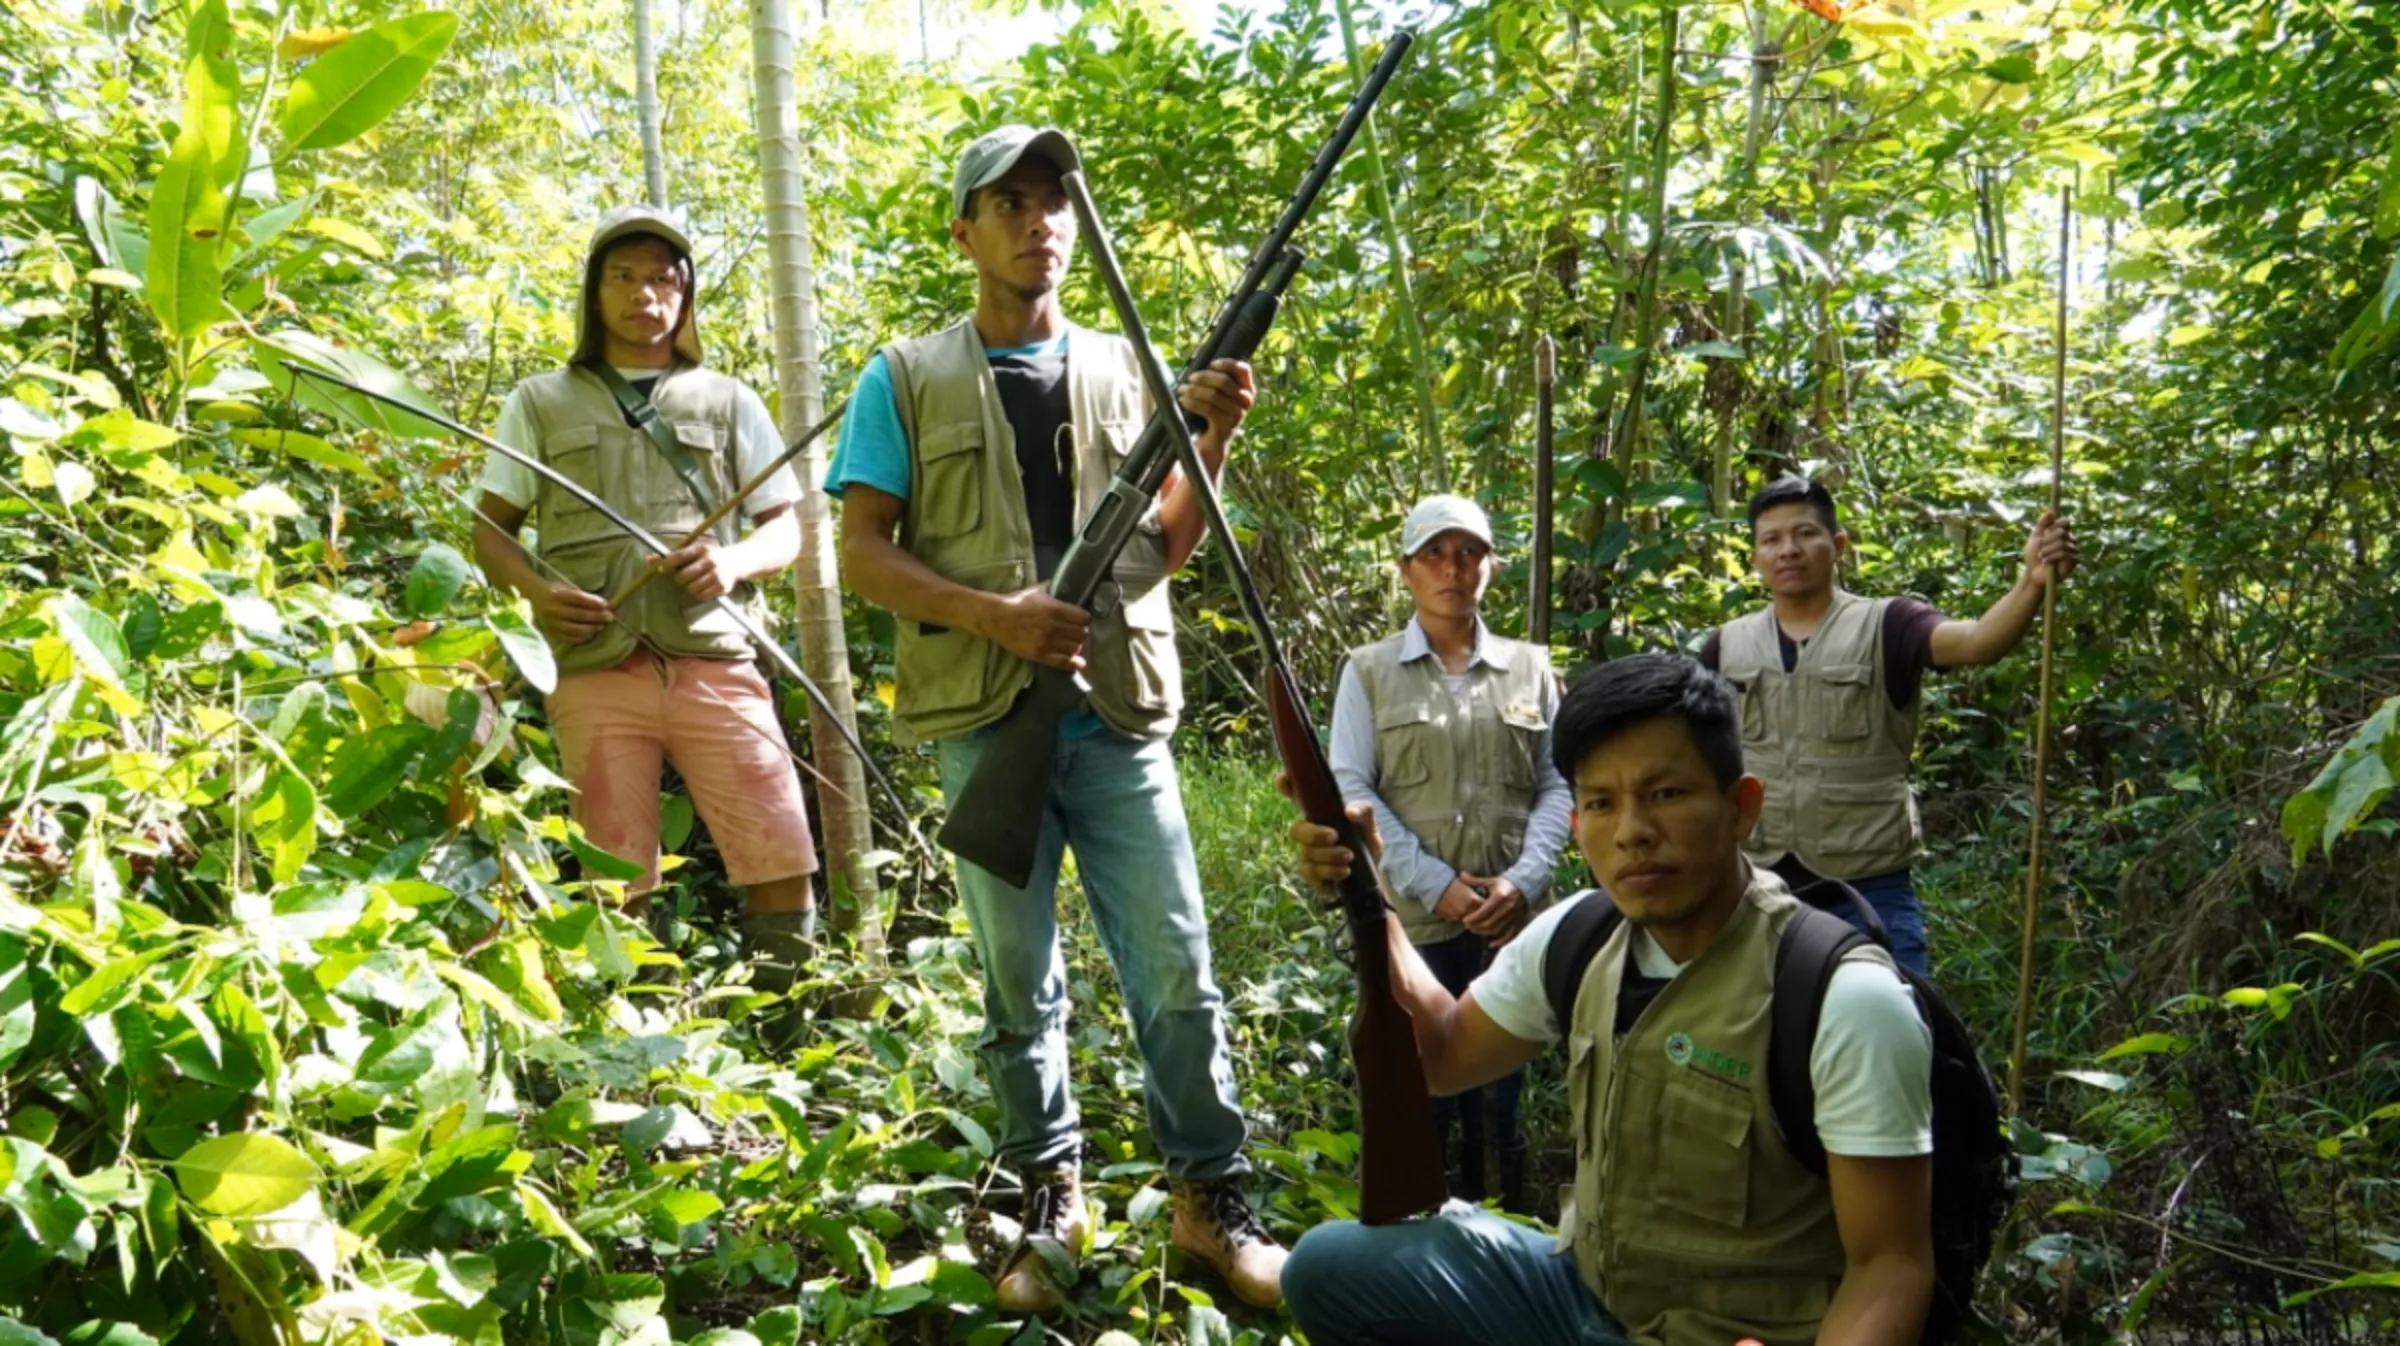 A group of indigenous land defenders pose for a photo in a forest near Flor de Ucayali, Peru, 6 June, 2022. Thomson Reuters Foundation/Dan Collyns